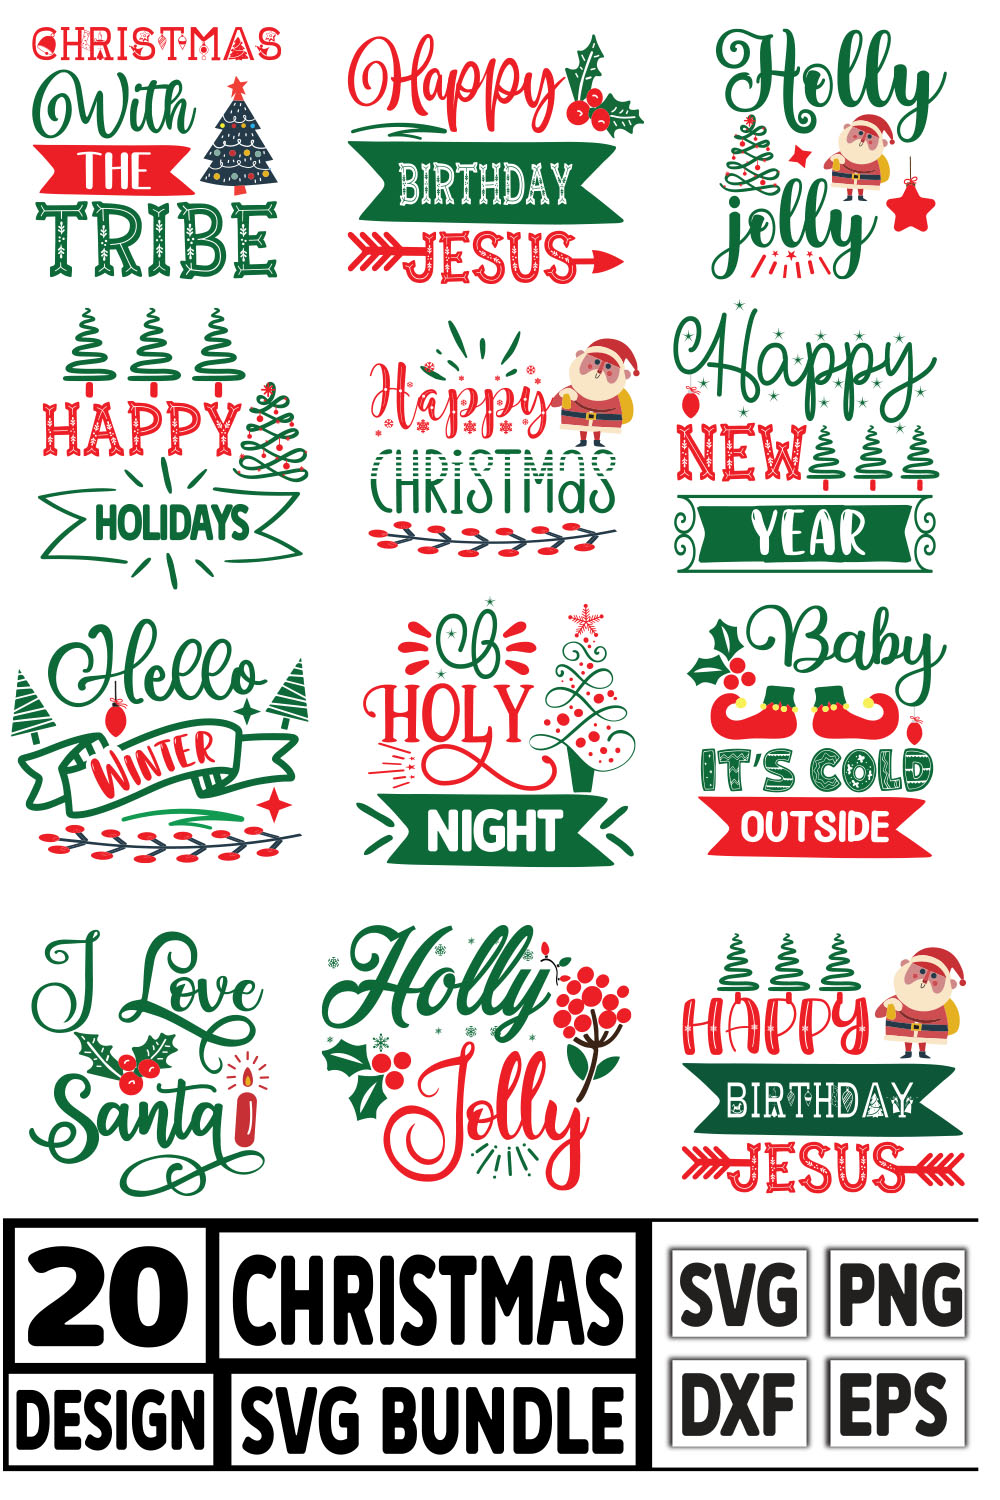 A pack of wonderful images for prints on a Christmas theme.